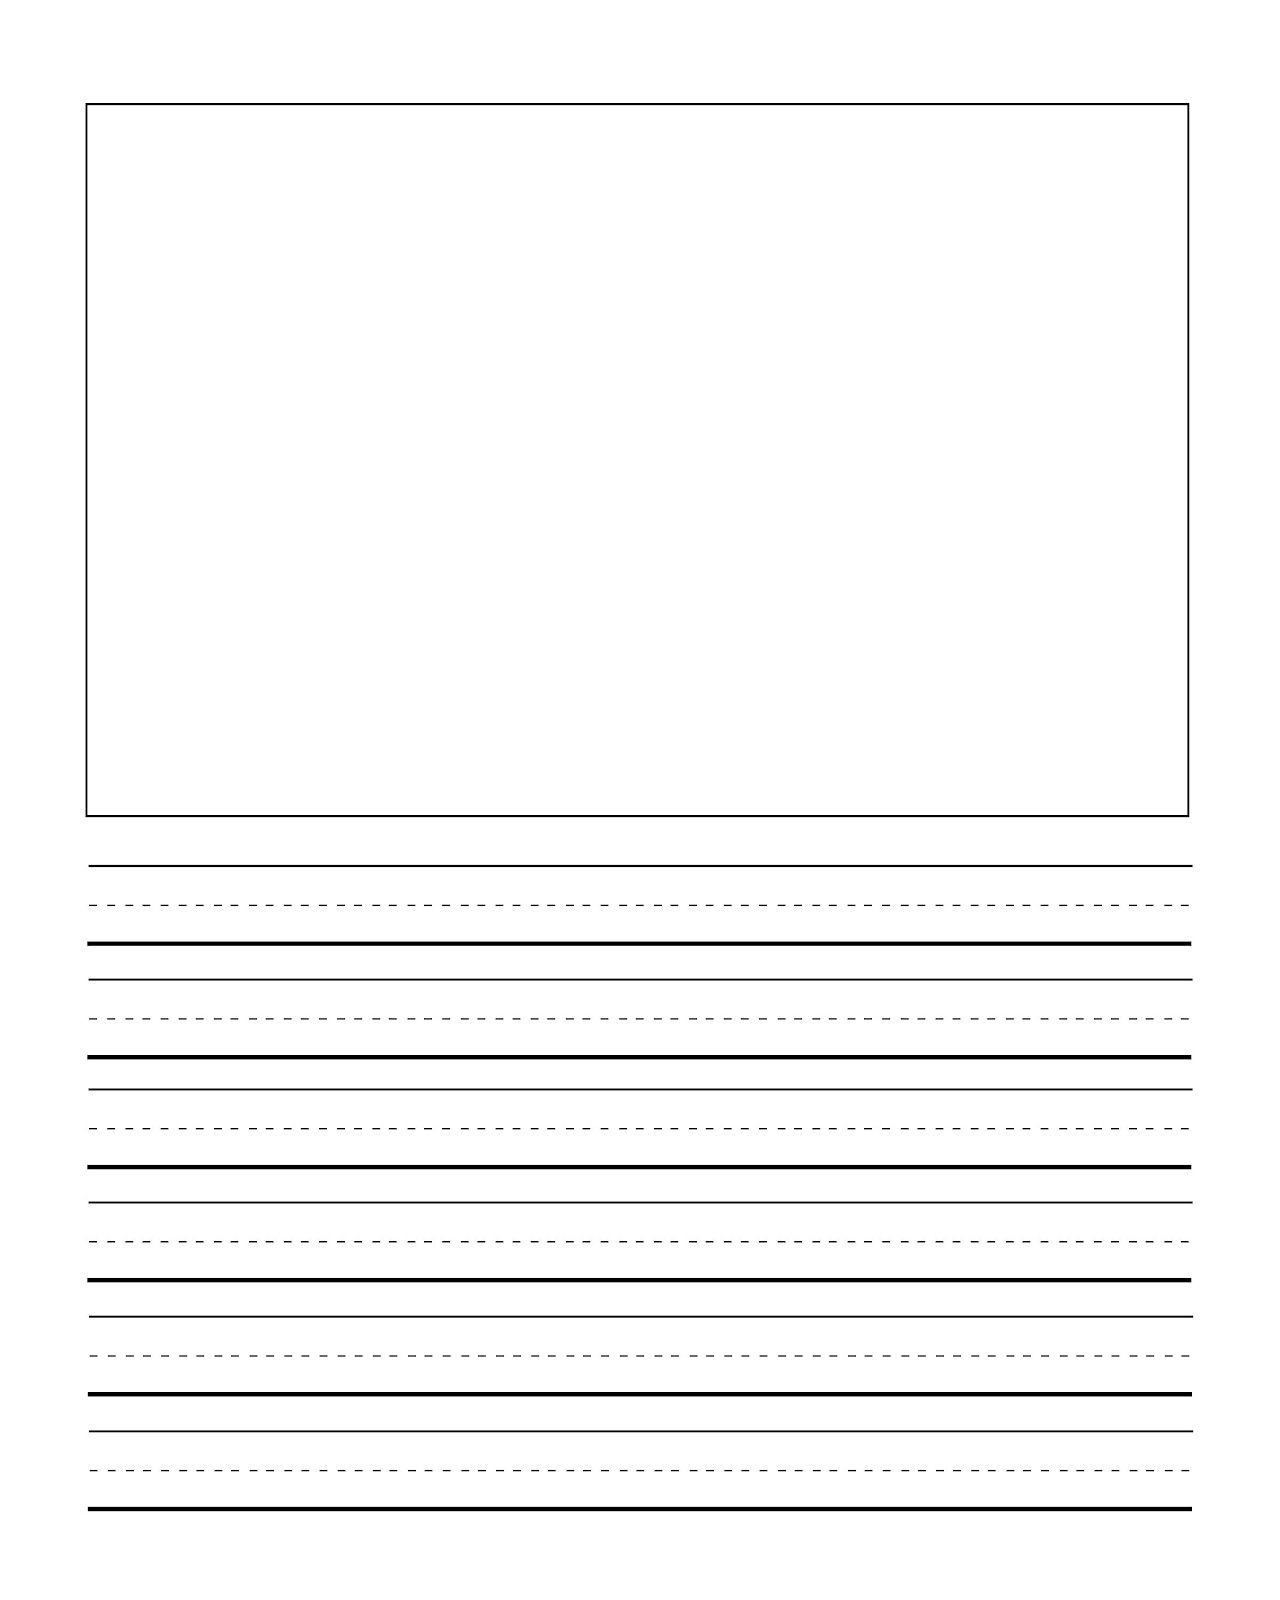 Free Printable Draw And Write Paper Get What You Need For Free